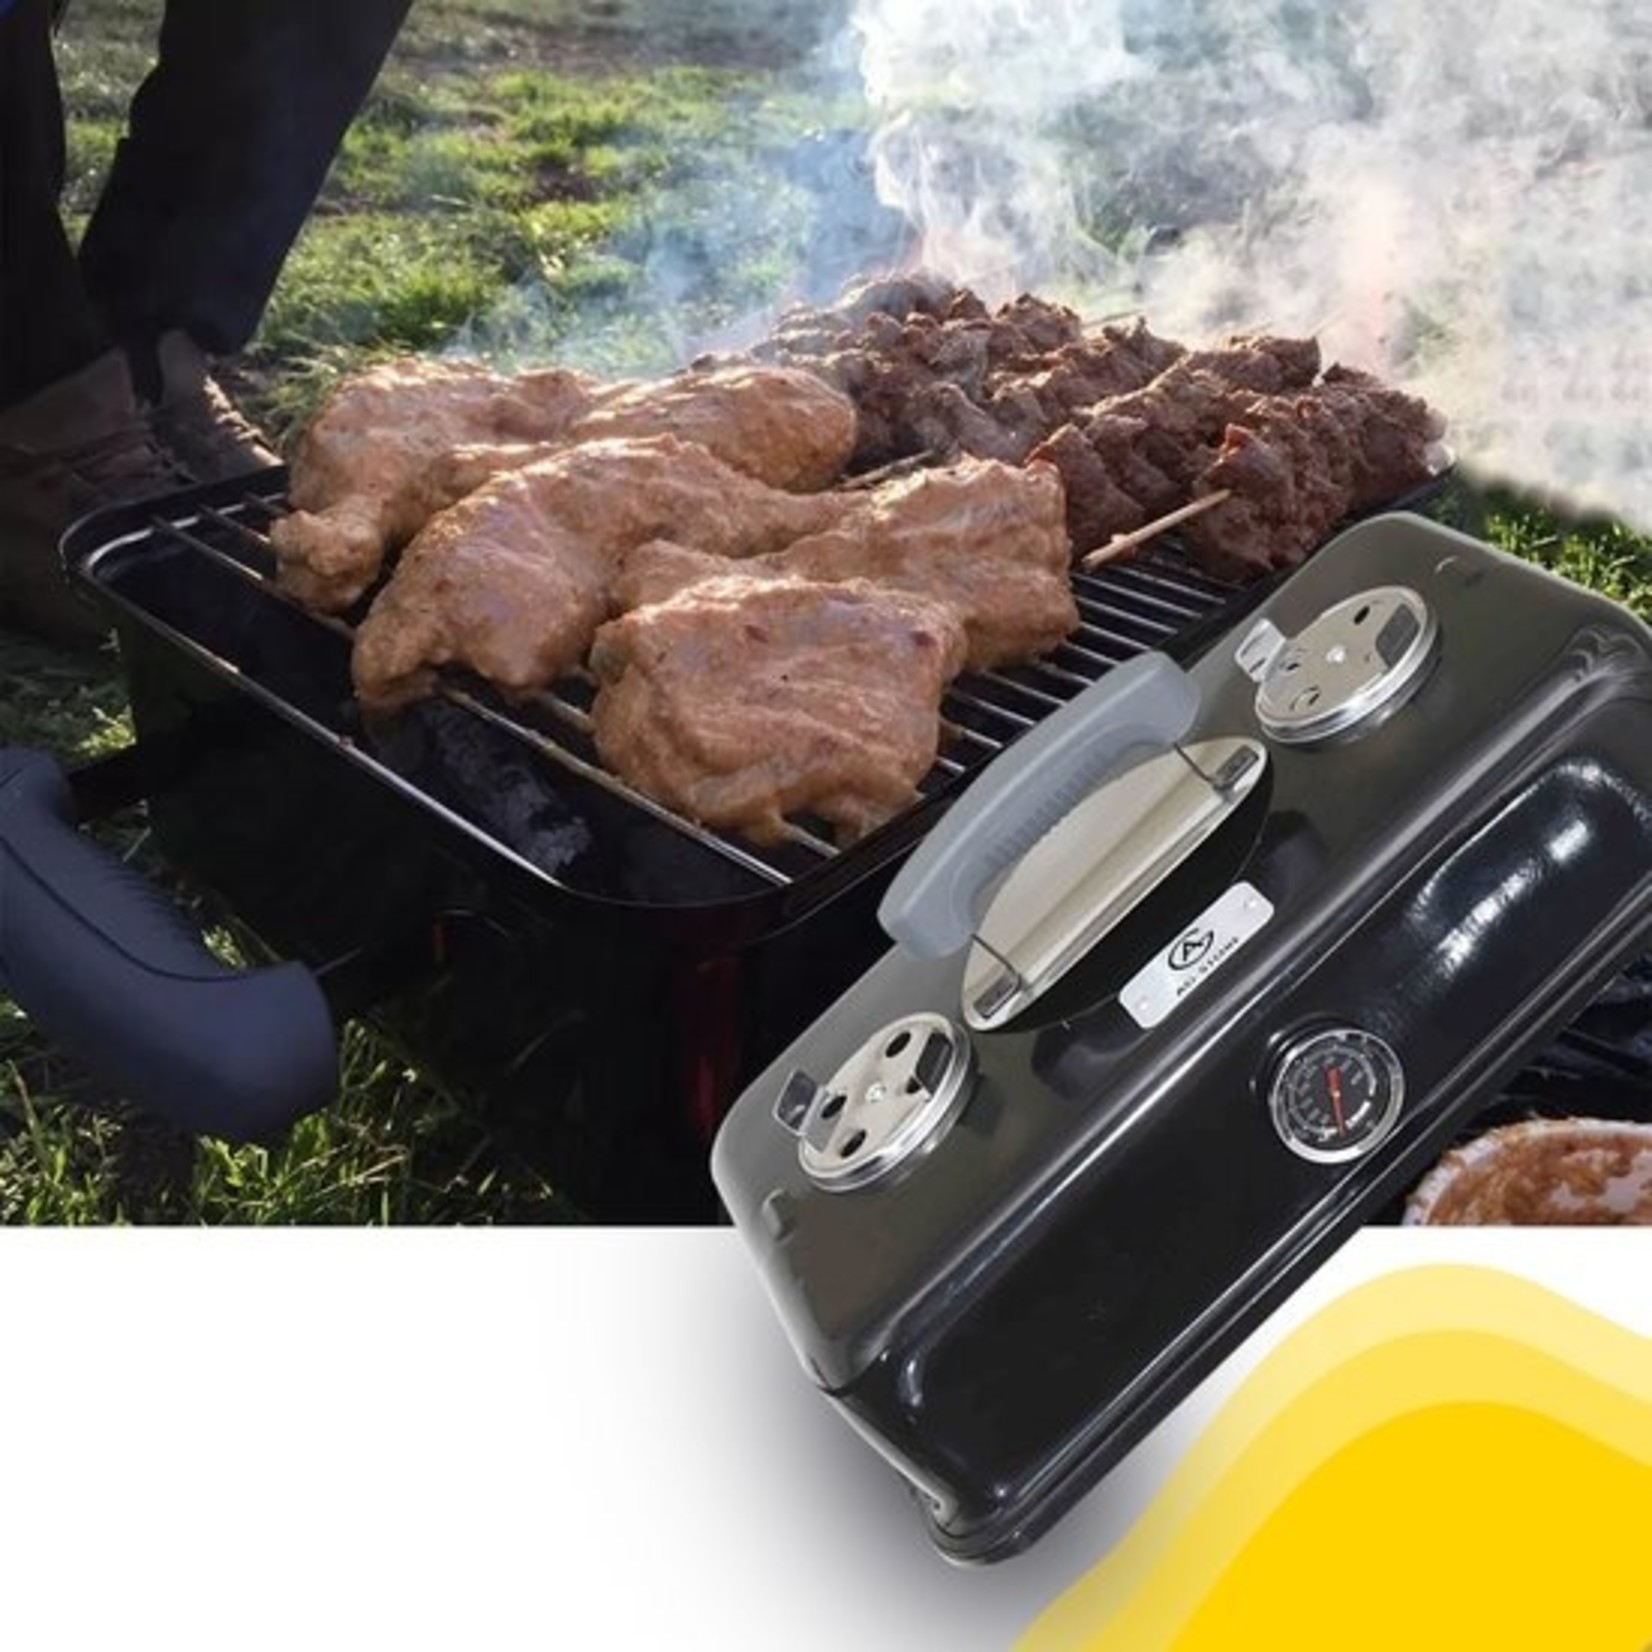 AG AG To-Go barbecue Ø44 cm - Houtskoolbarbecues - incl. Thermometer - temperatuur roestvrij - Compact -Vierkante Barbecue - Incl. deksel- traditionele bbq - 6 personen -Anywhere Ventilatierooster voor zuurstofregulering - Zwart